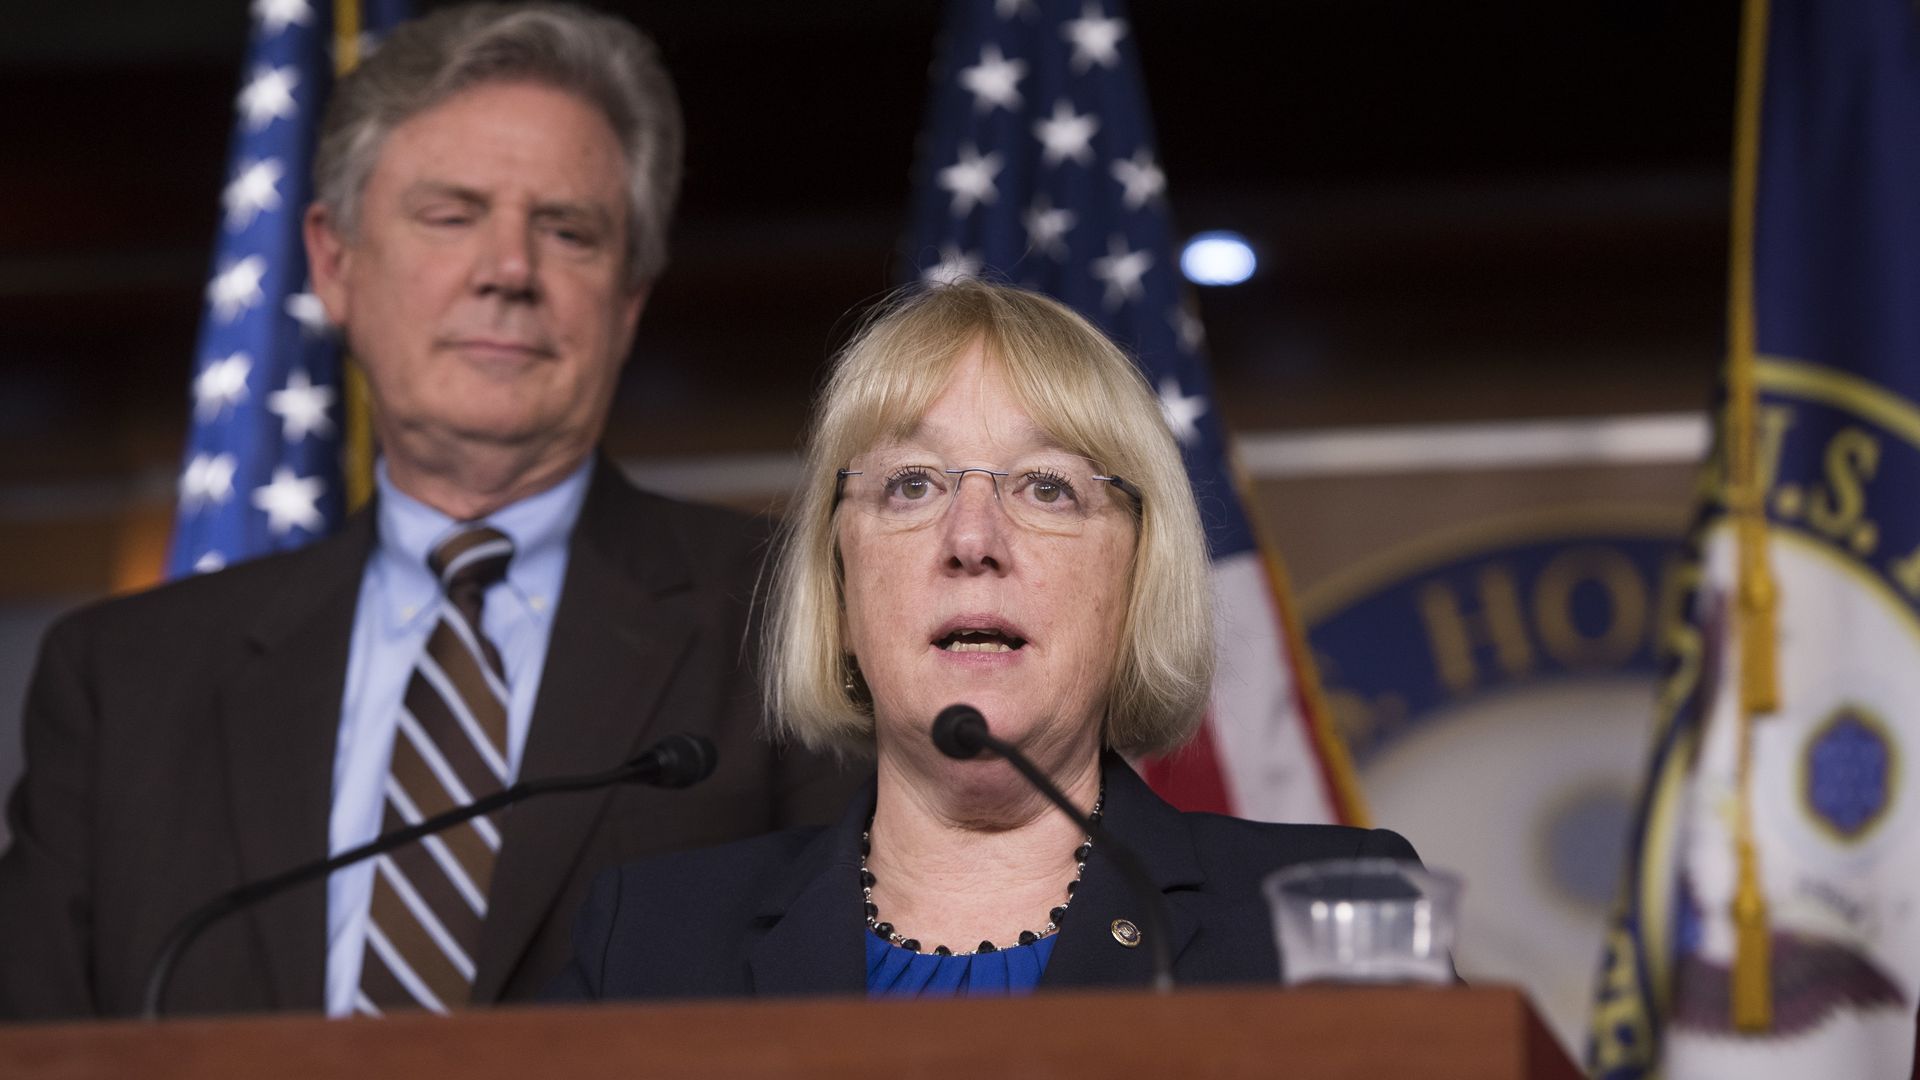 Photo of Patty Murray speaking from a podium with Frank Pallone standing behind her